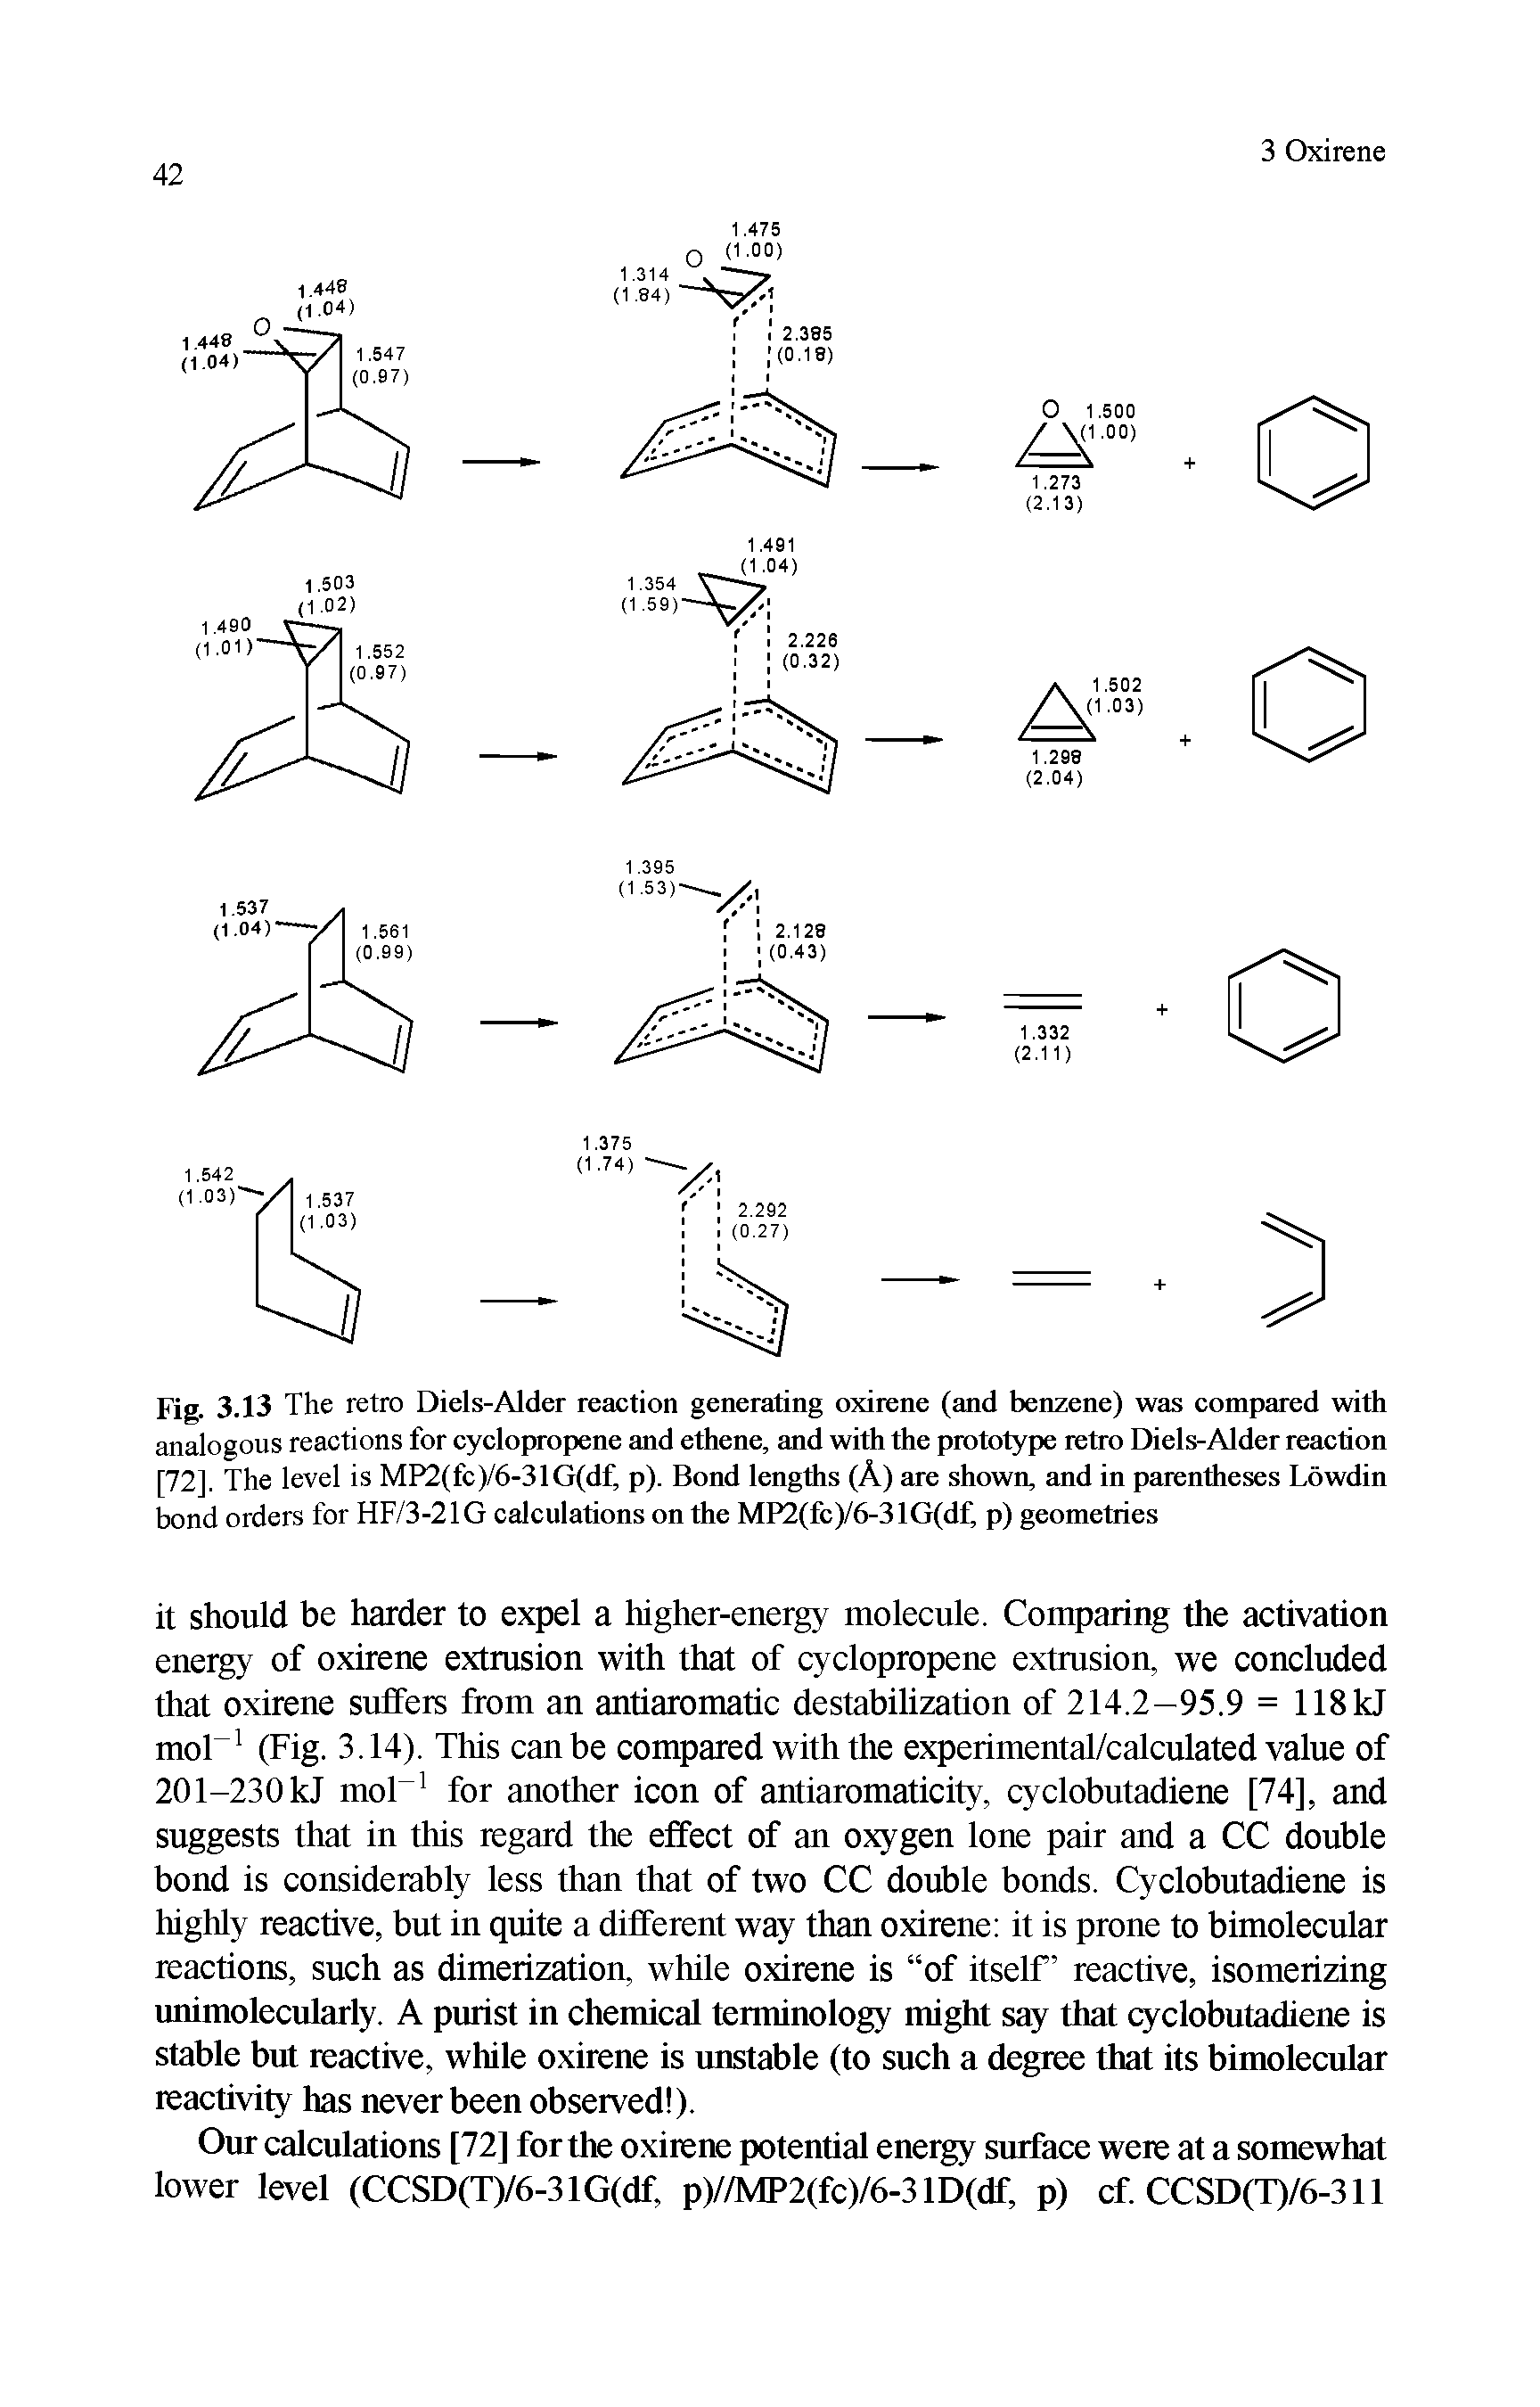 Fig. 3.13 The retro Diels-Alder reaction generating oxirene (and benzene) was compared with analogous reactions for cyclopropene and ethene, and with the prototype retro Diels-Alder reaction [72]. The level is MP2(fc)/6-31G(df, p). Bond lengths (A) are shown, and in parentheses Lowdin bond orders for HF/3-21G calculations on the MP2(fc)/6-31G(df p) geometries...